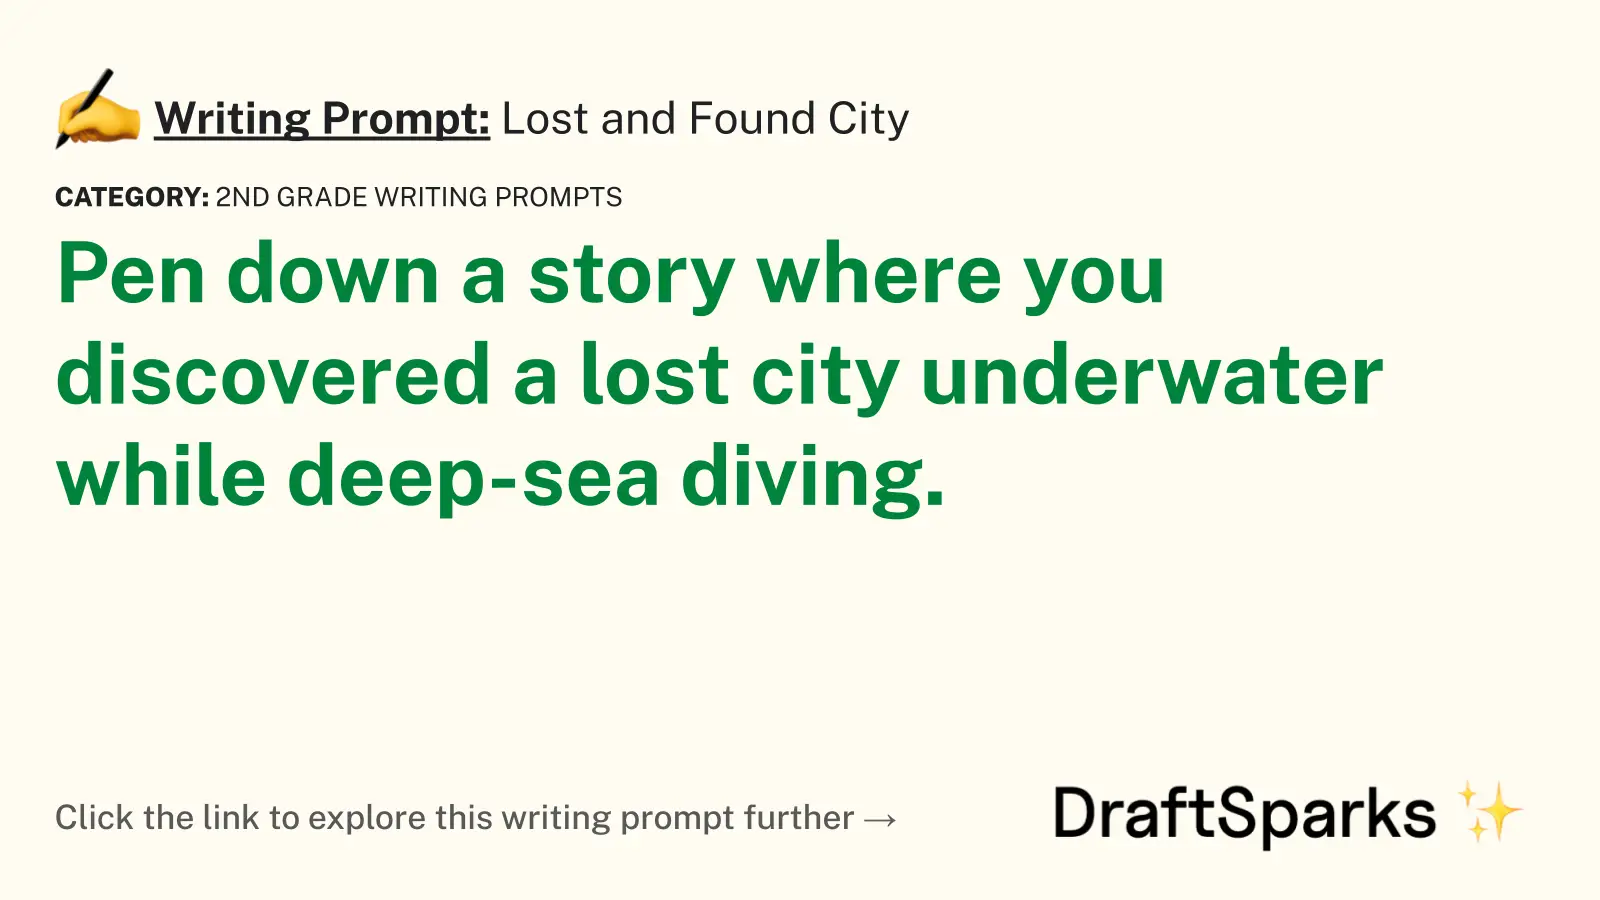 Lost and Found City